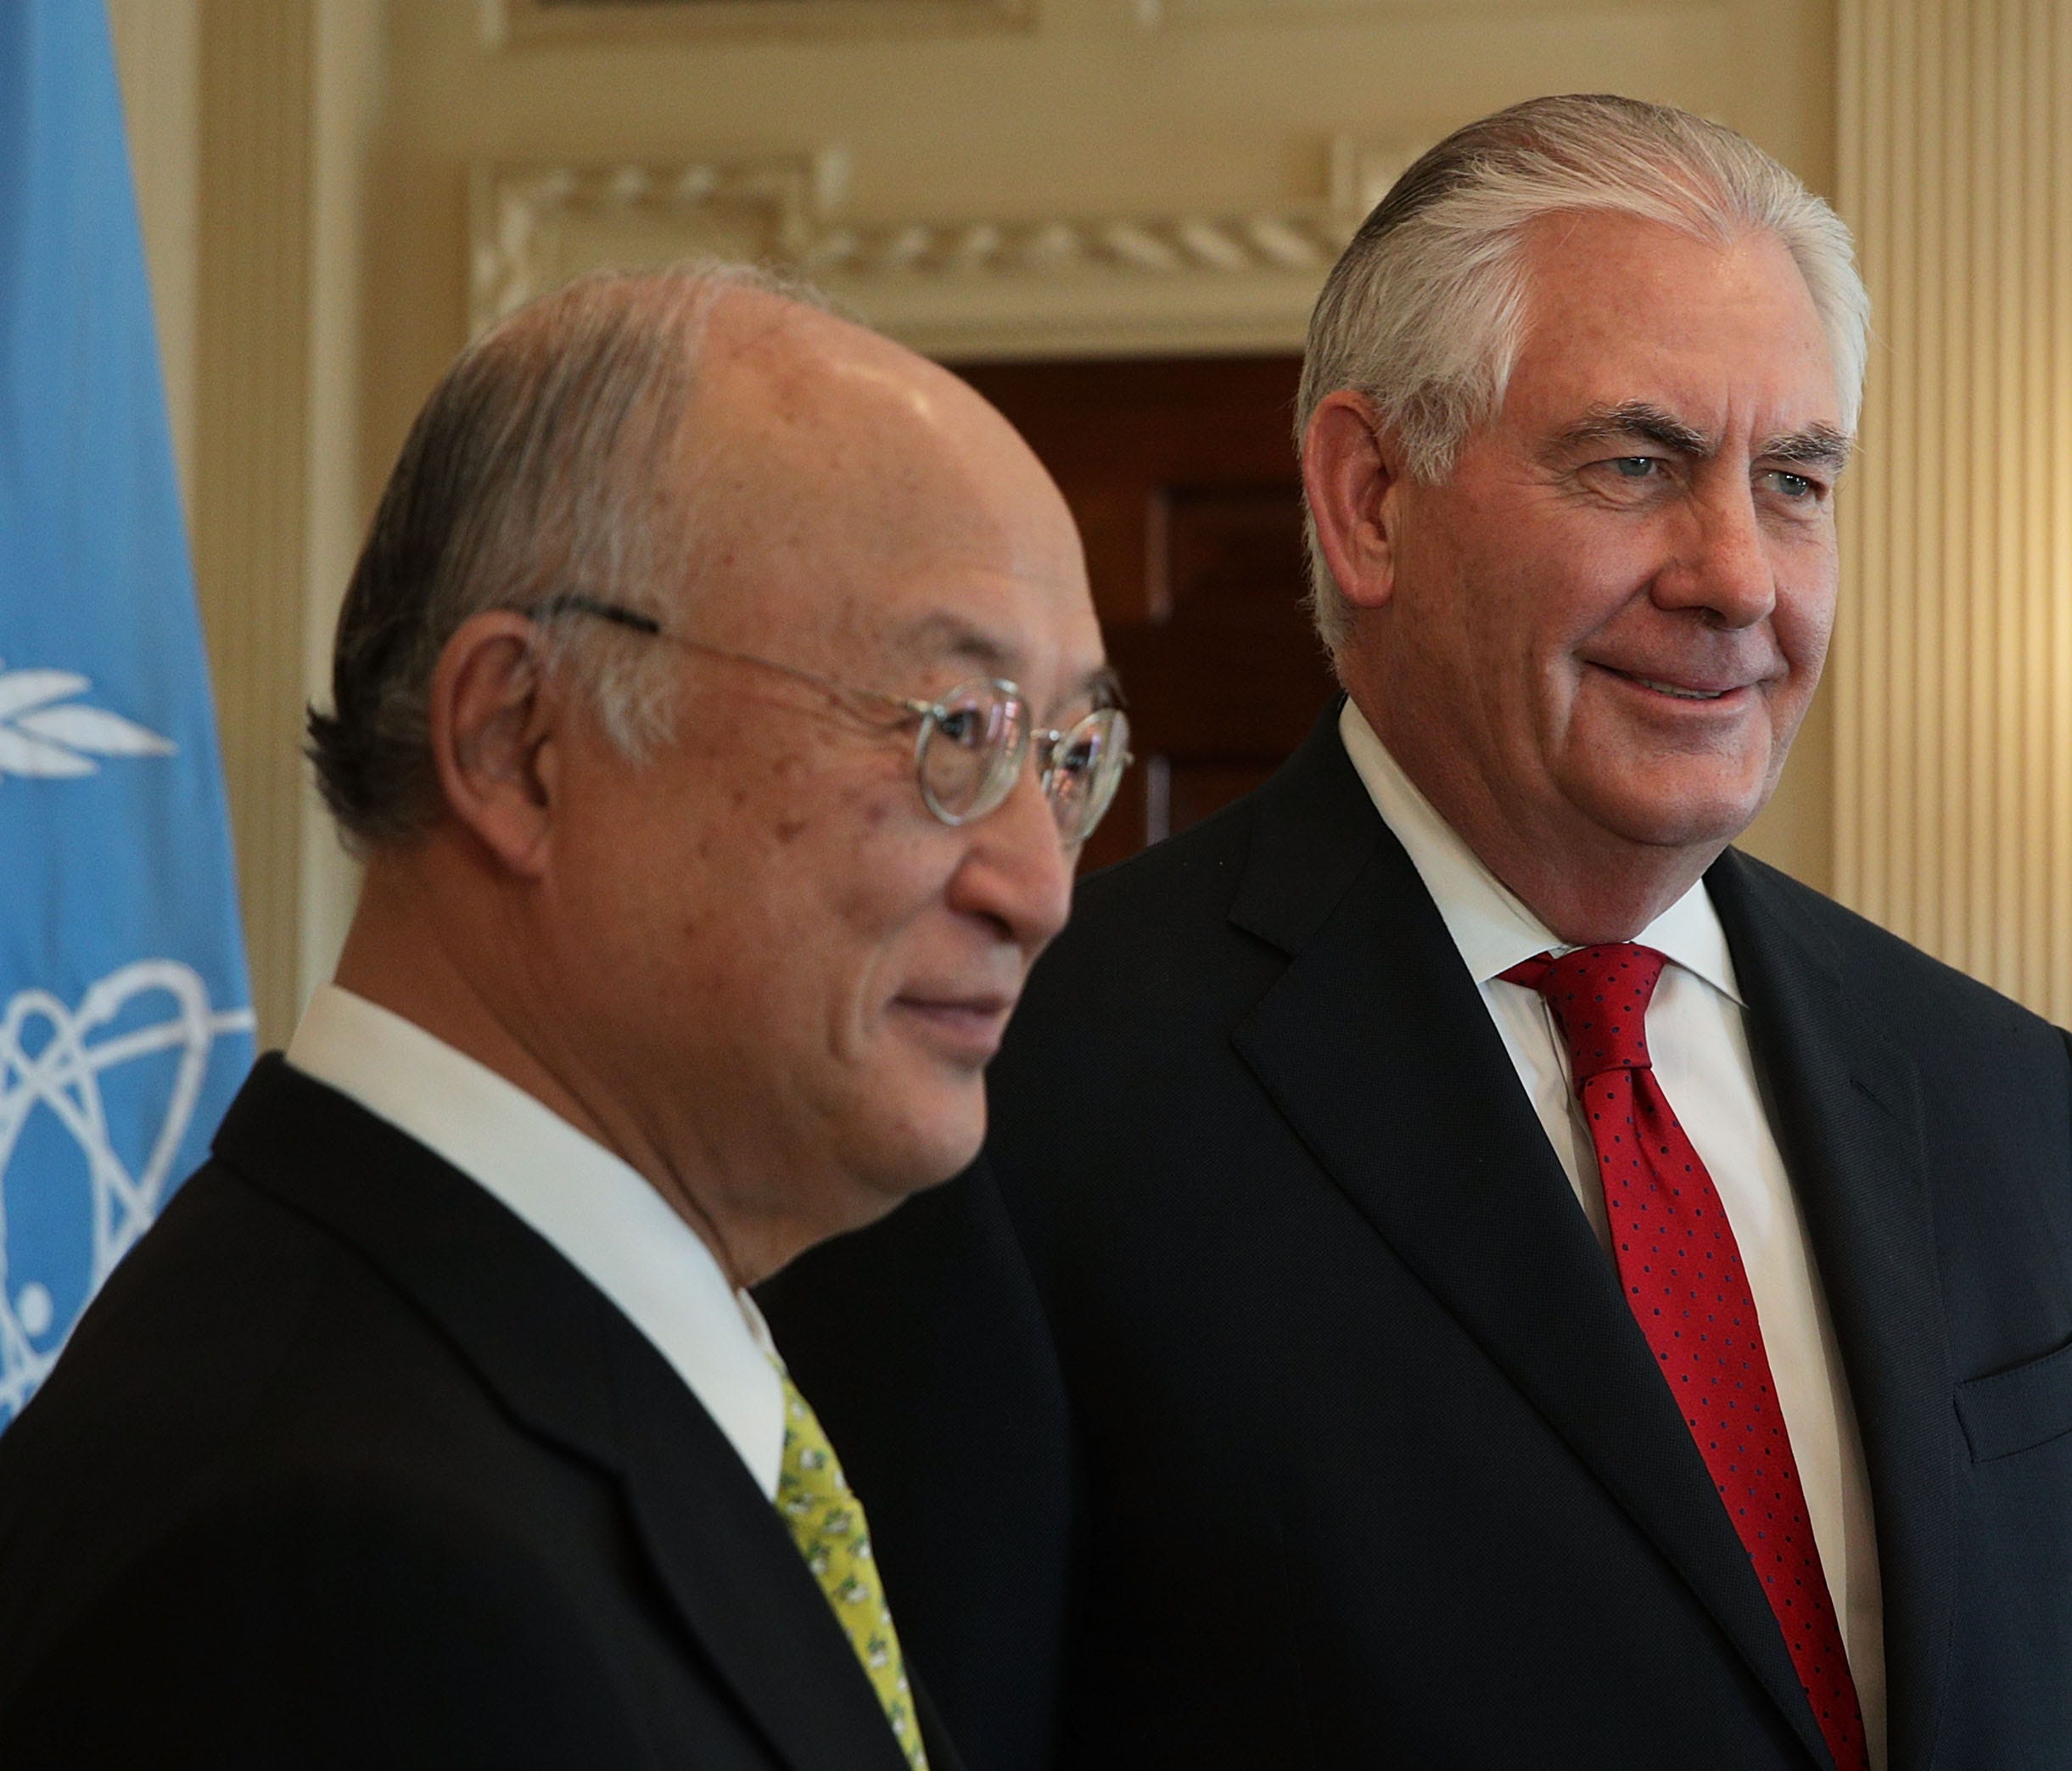 Secretary of State Rex Tillerson meets with International Atomic Energy Agency Director Yukiya Amano at the State Department March 2, 2017 in Washington, DC.